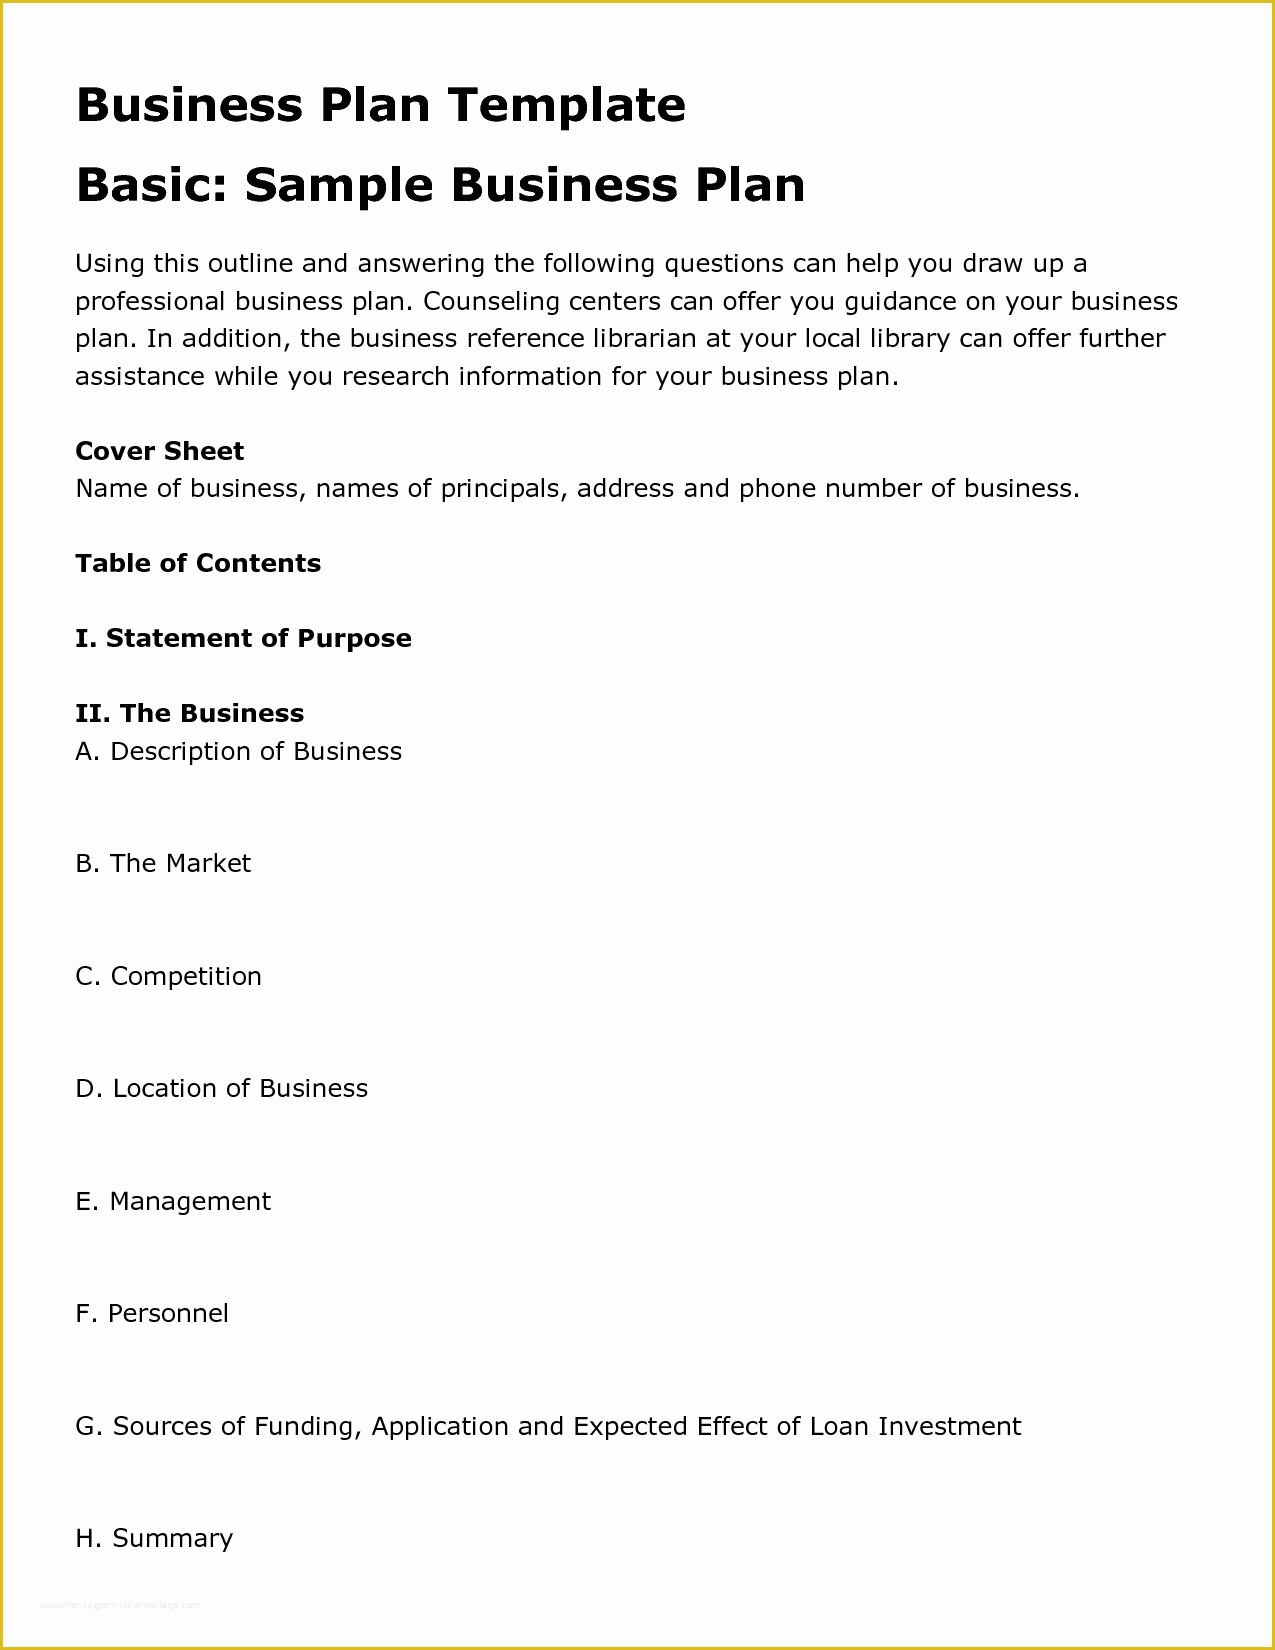 Free Basic Business Plan Template Download Of Printable Sample Business Plan Template form